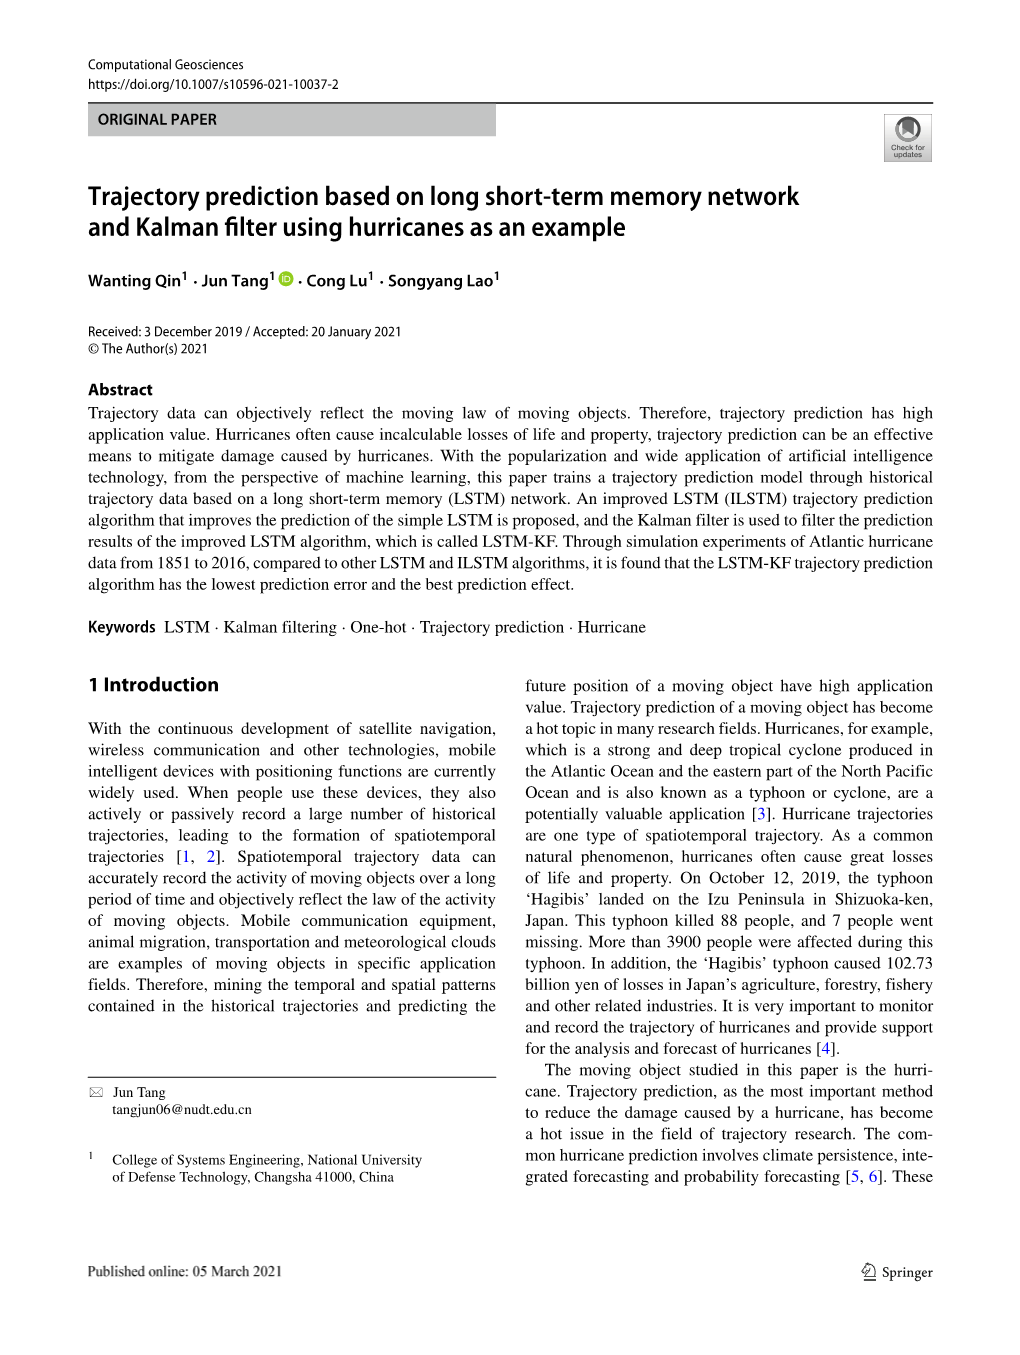 Trajectory Prediction Based on Long Short-Term Memory Network and Kalman Filter Using Hurricanes As an Example